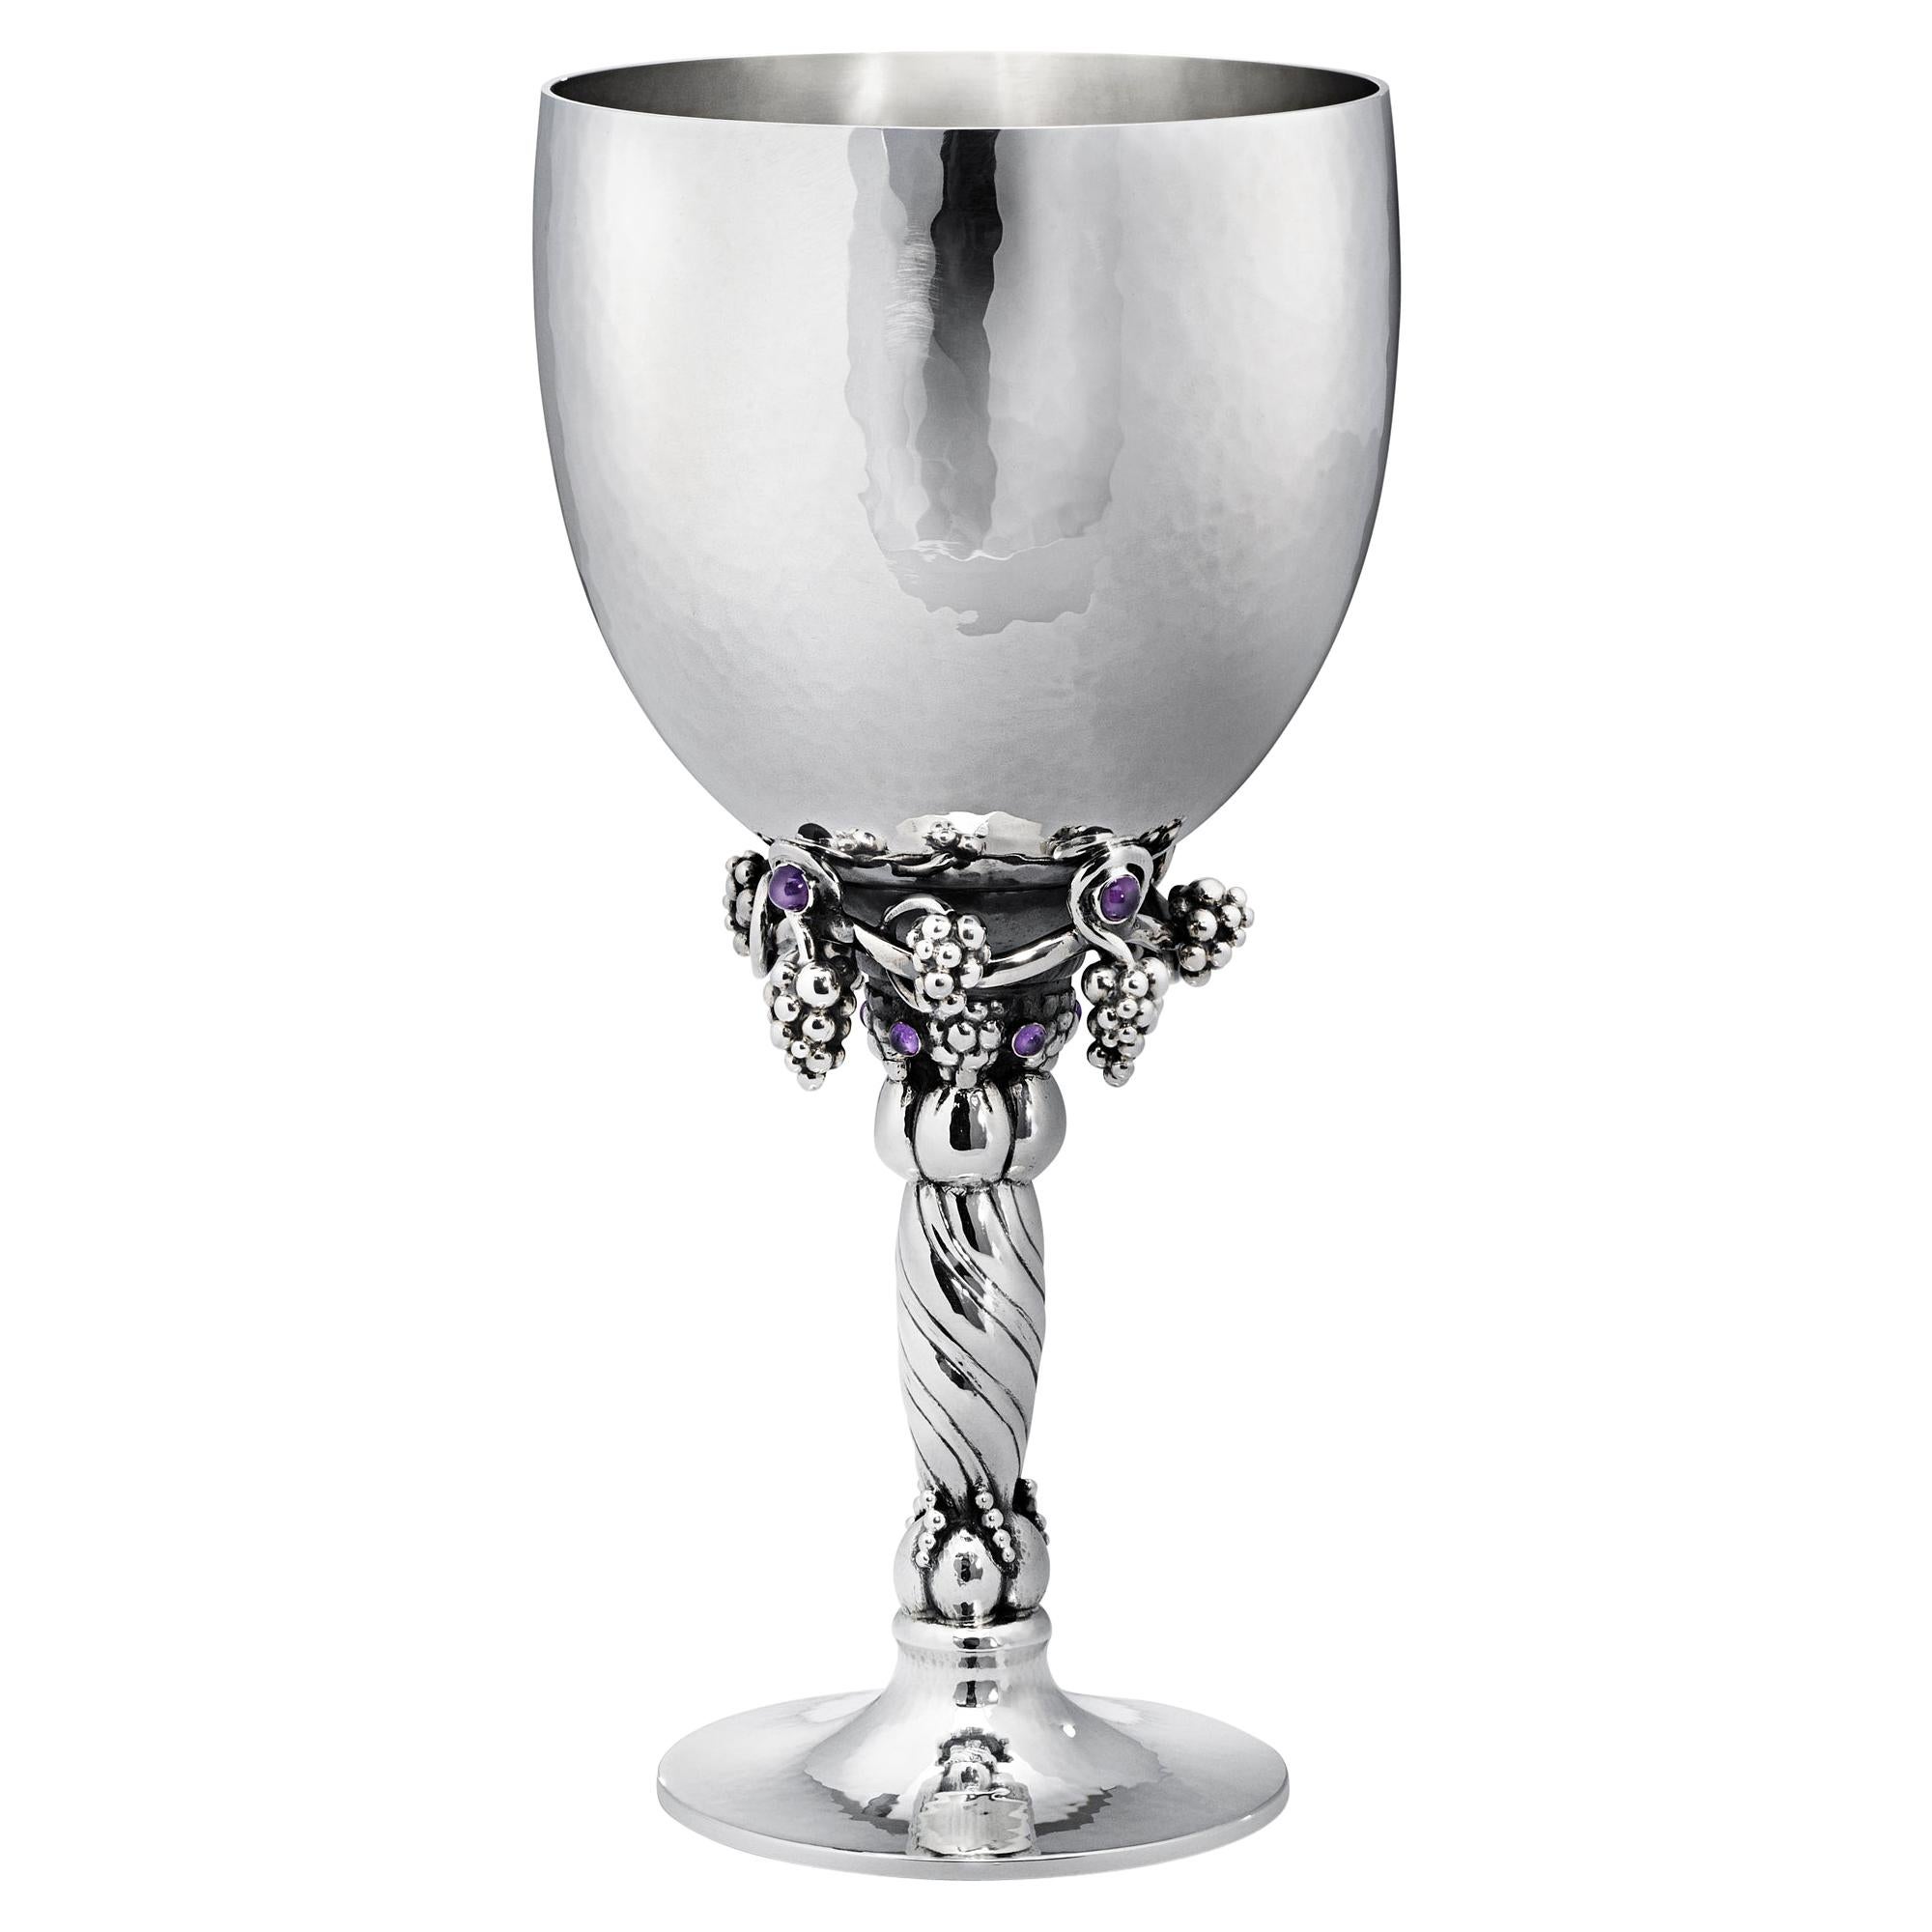 Georg Jensen 263A Handcrafted Sterling Silver Goblet in Amethyst